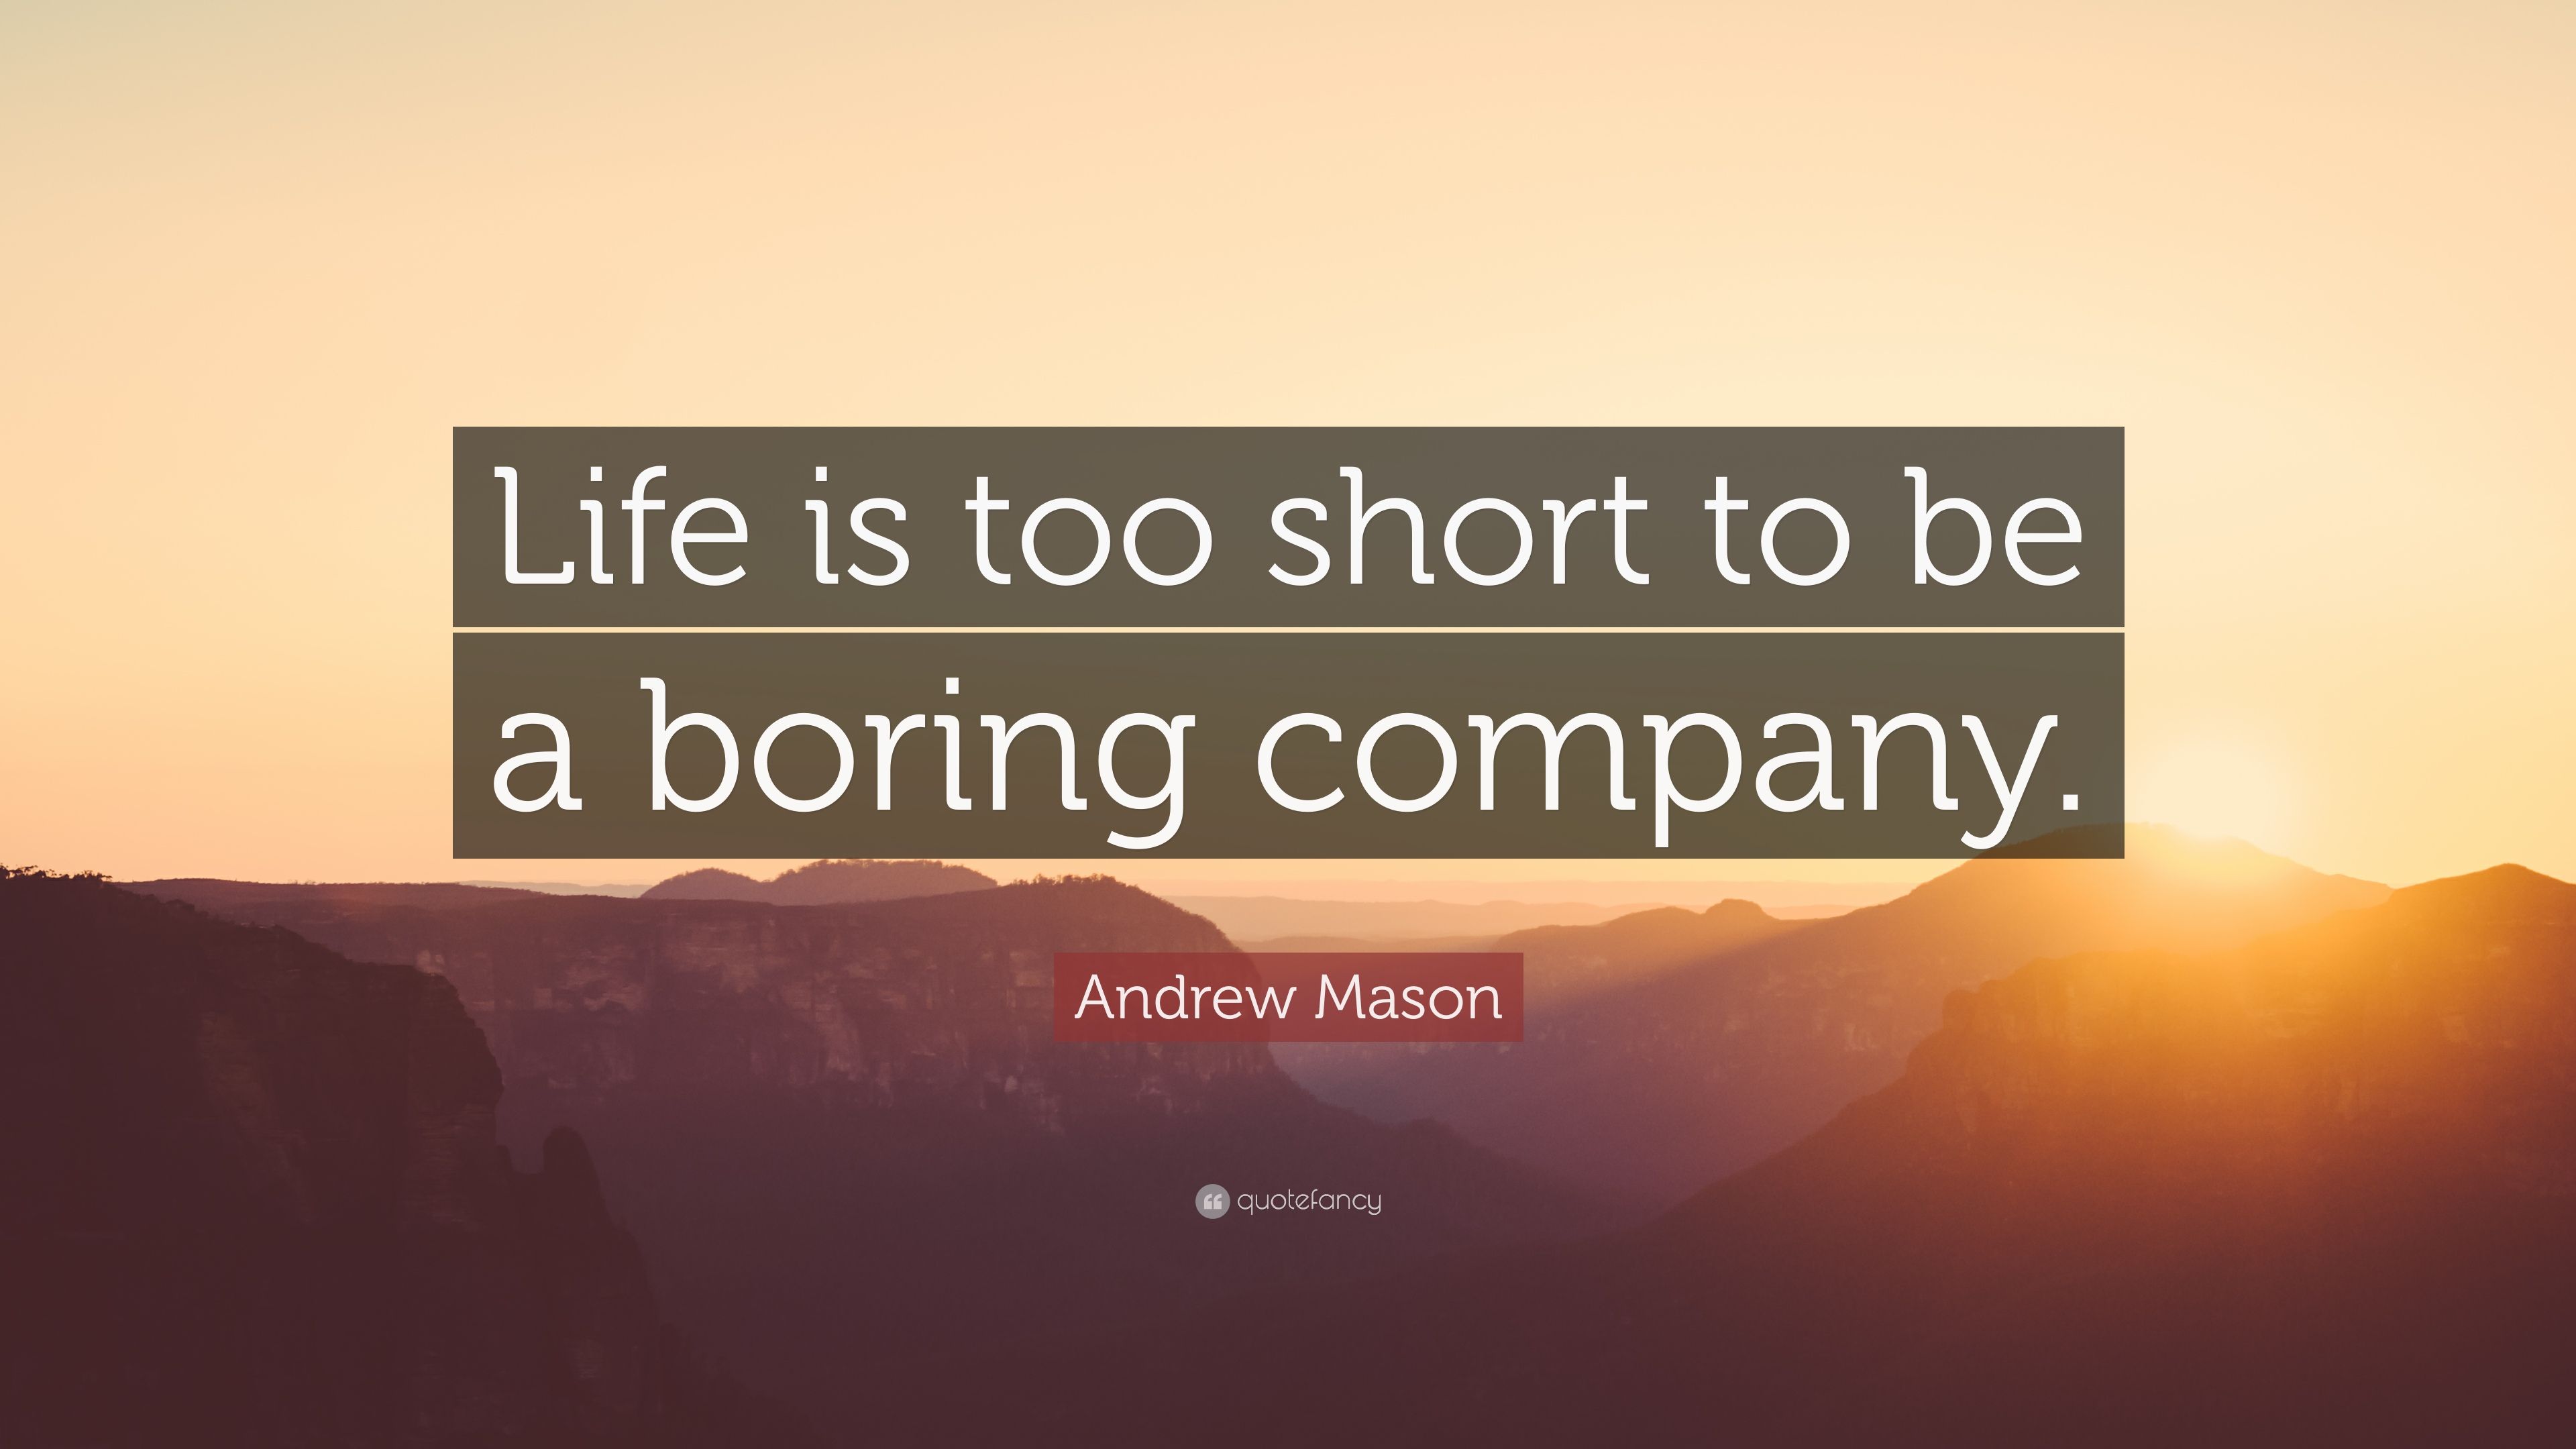 Andrew Mason Quote: "Life is too short to be a boring company. 